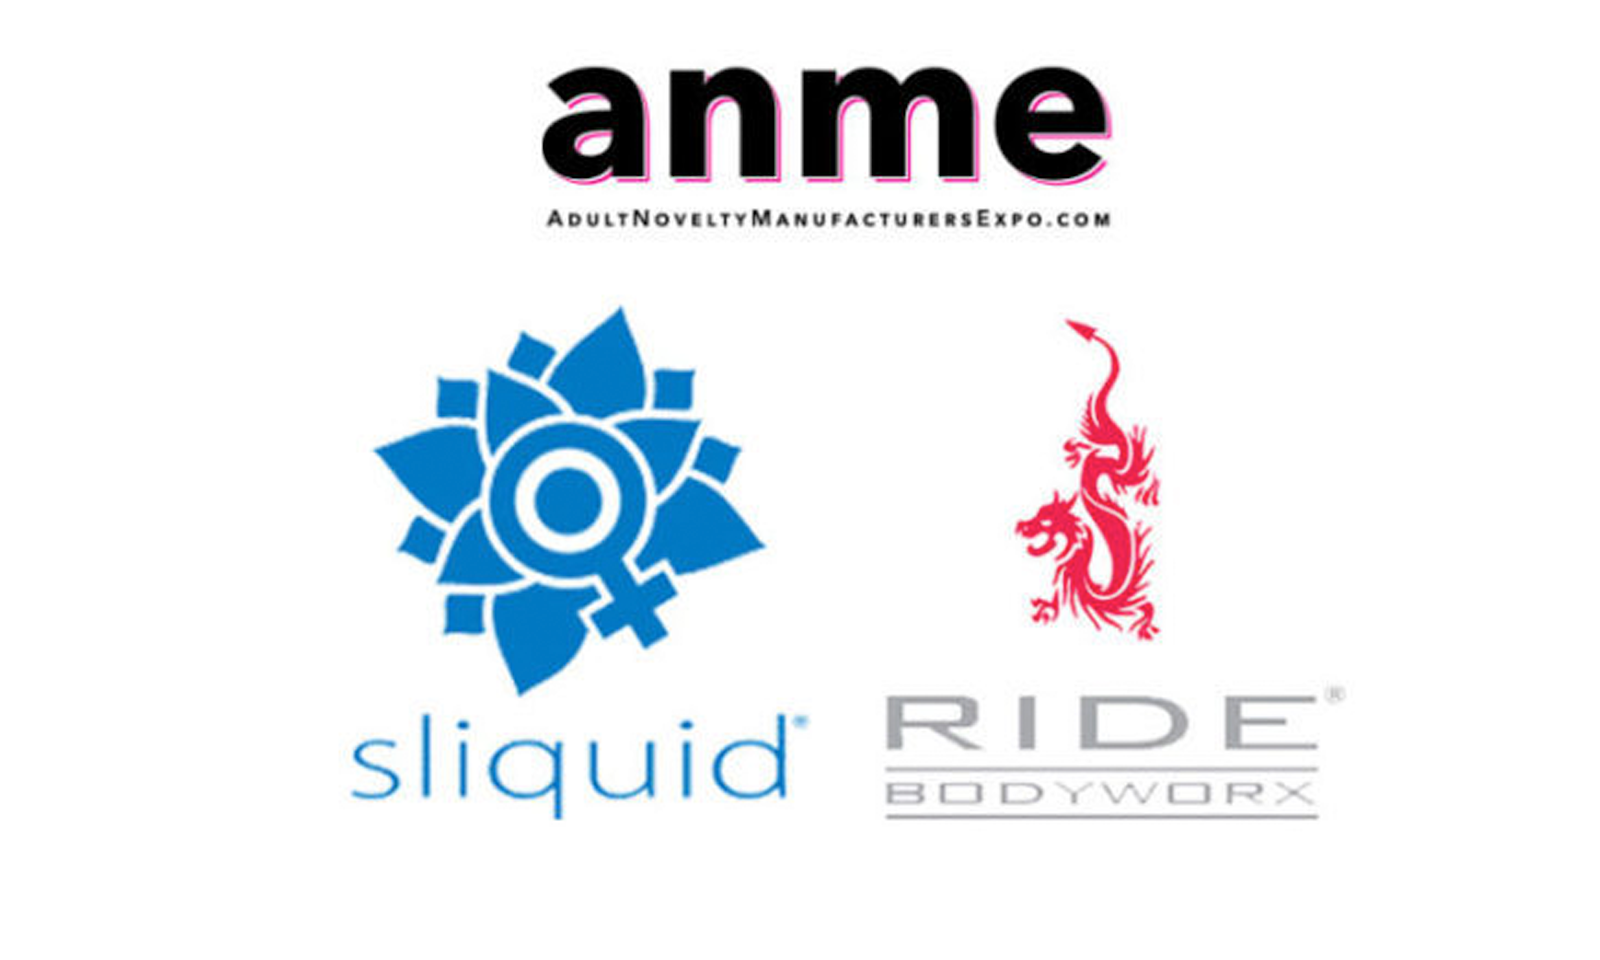 Sliquid Exhibiting at ANME, Showcasing New Products